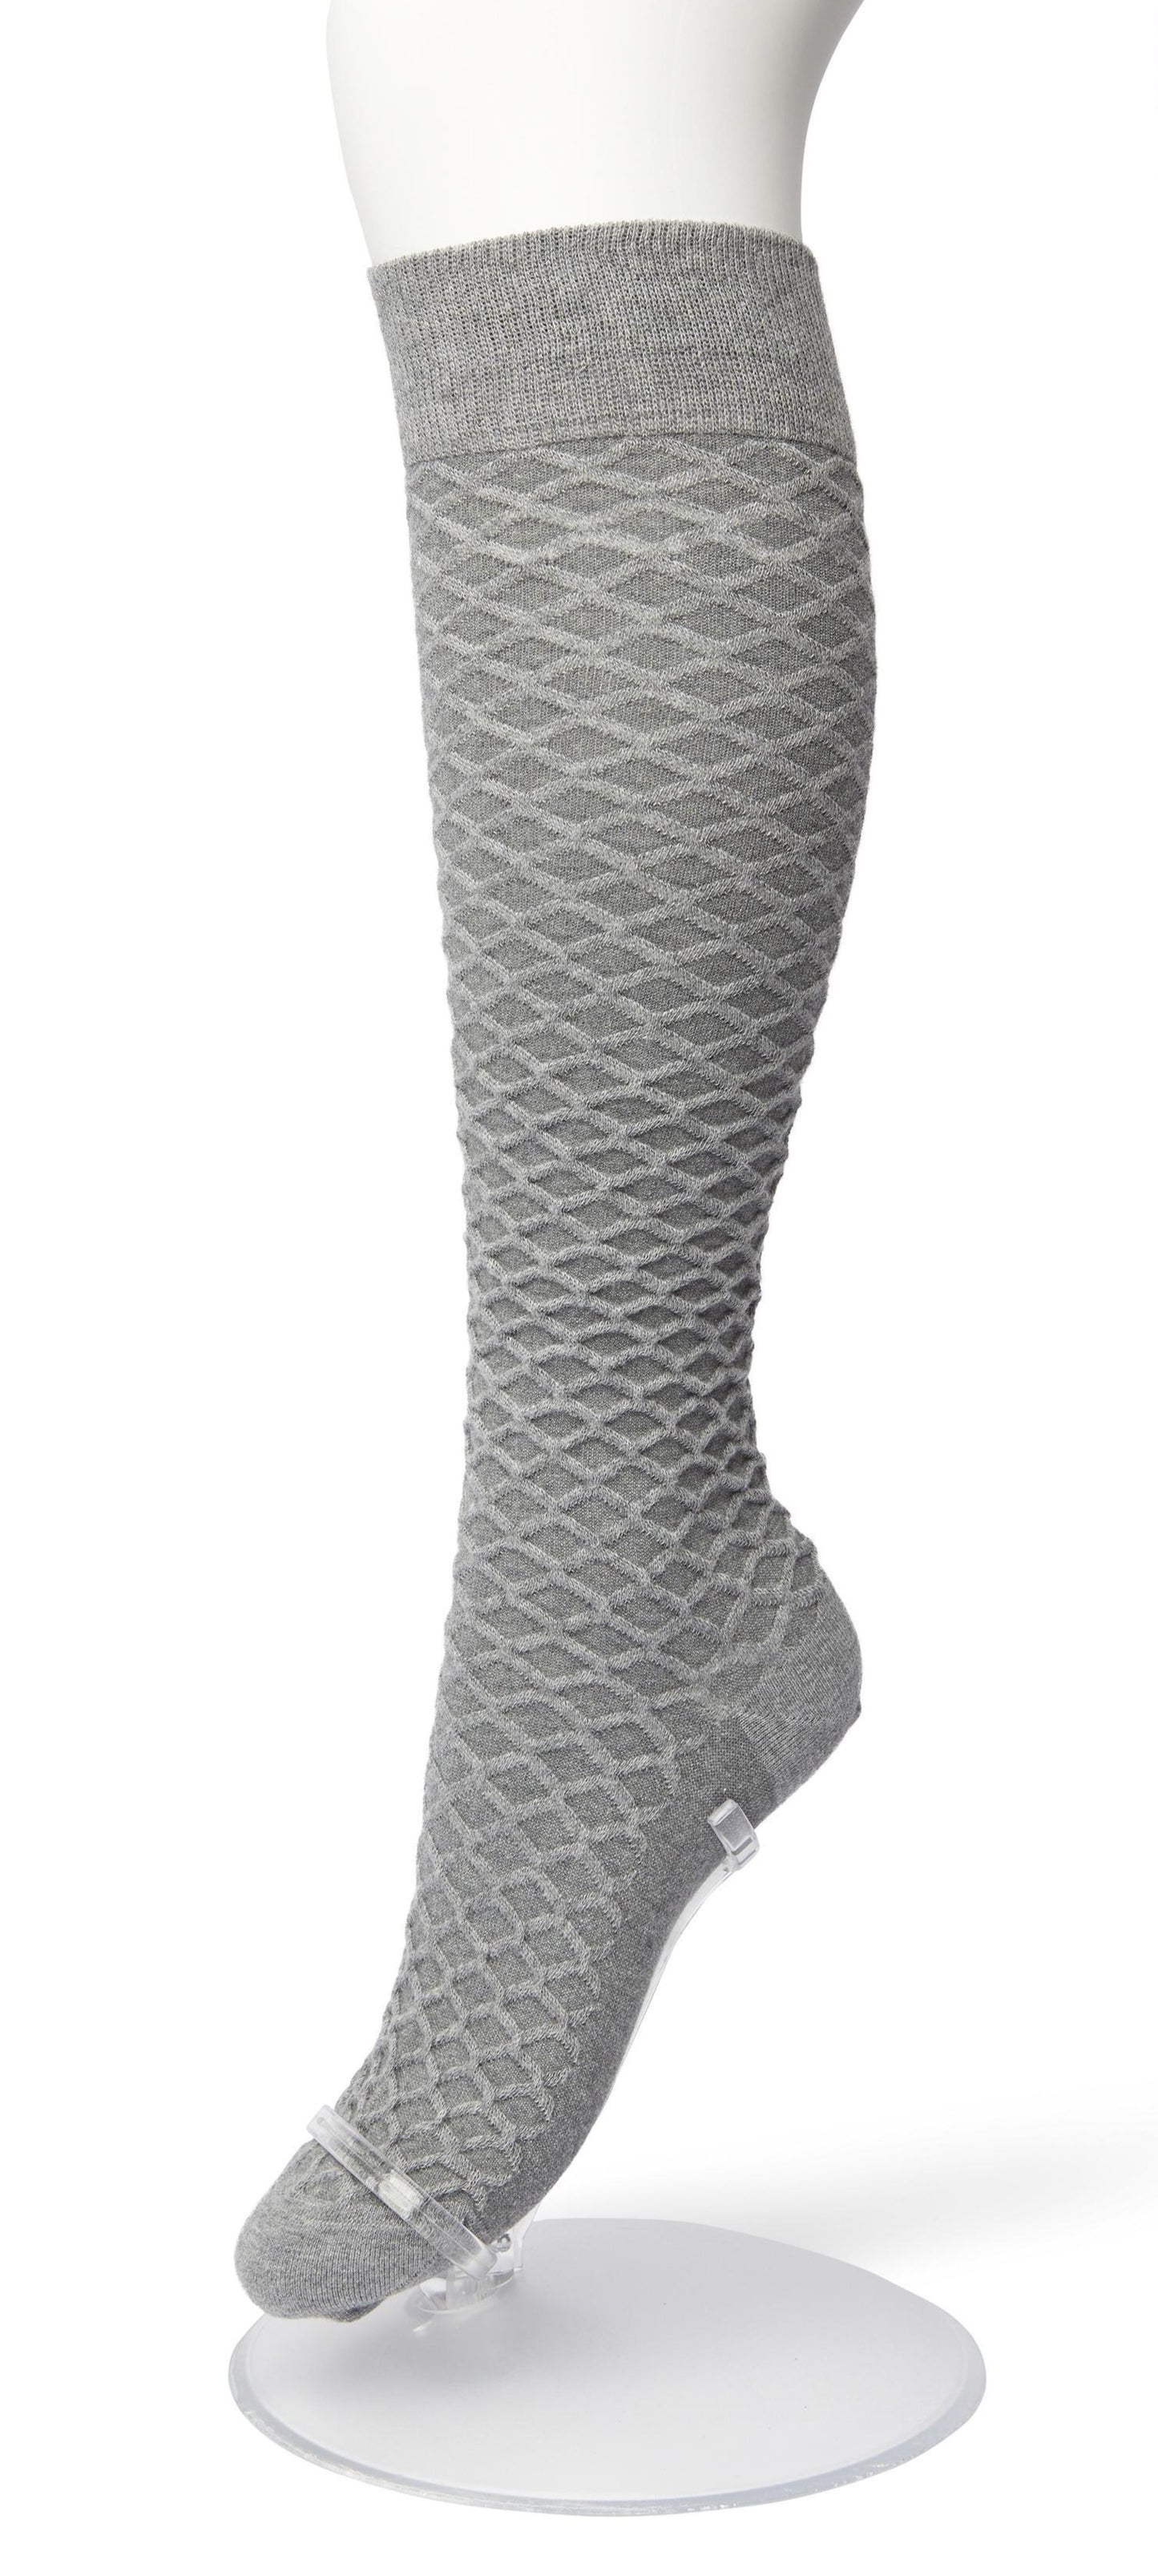 Bonnie Doon BP211506 Cable Knee-highs - Grey (medium grey heather) soft and warm knitted knee-high socks with a criss-cross diamond textured pattern